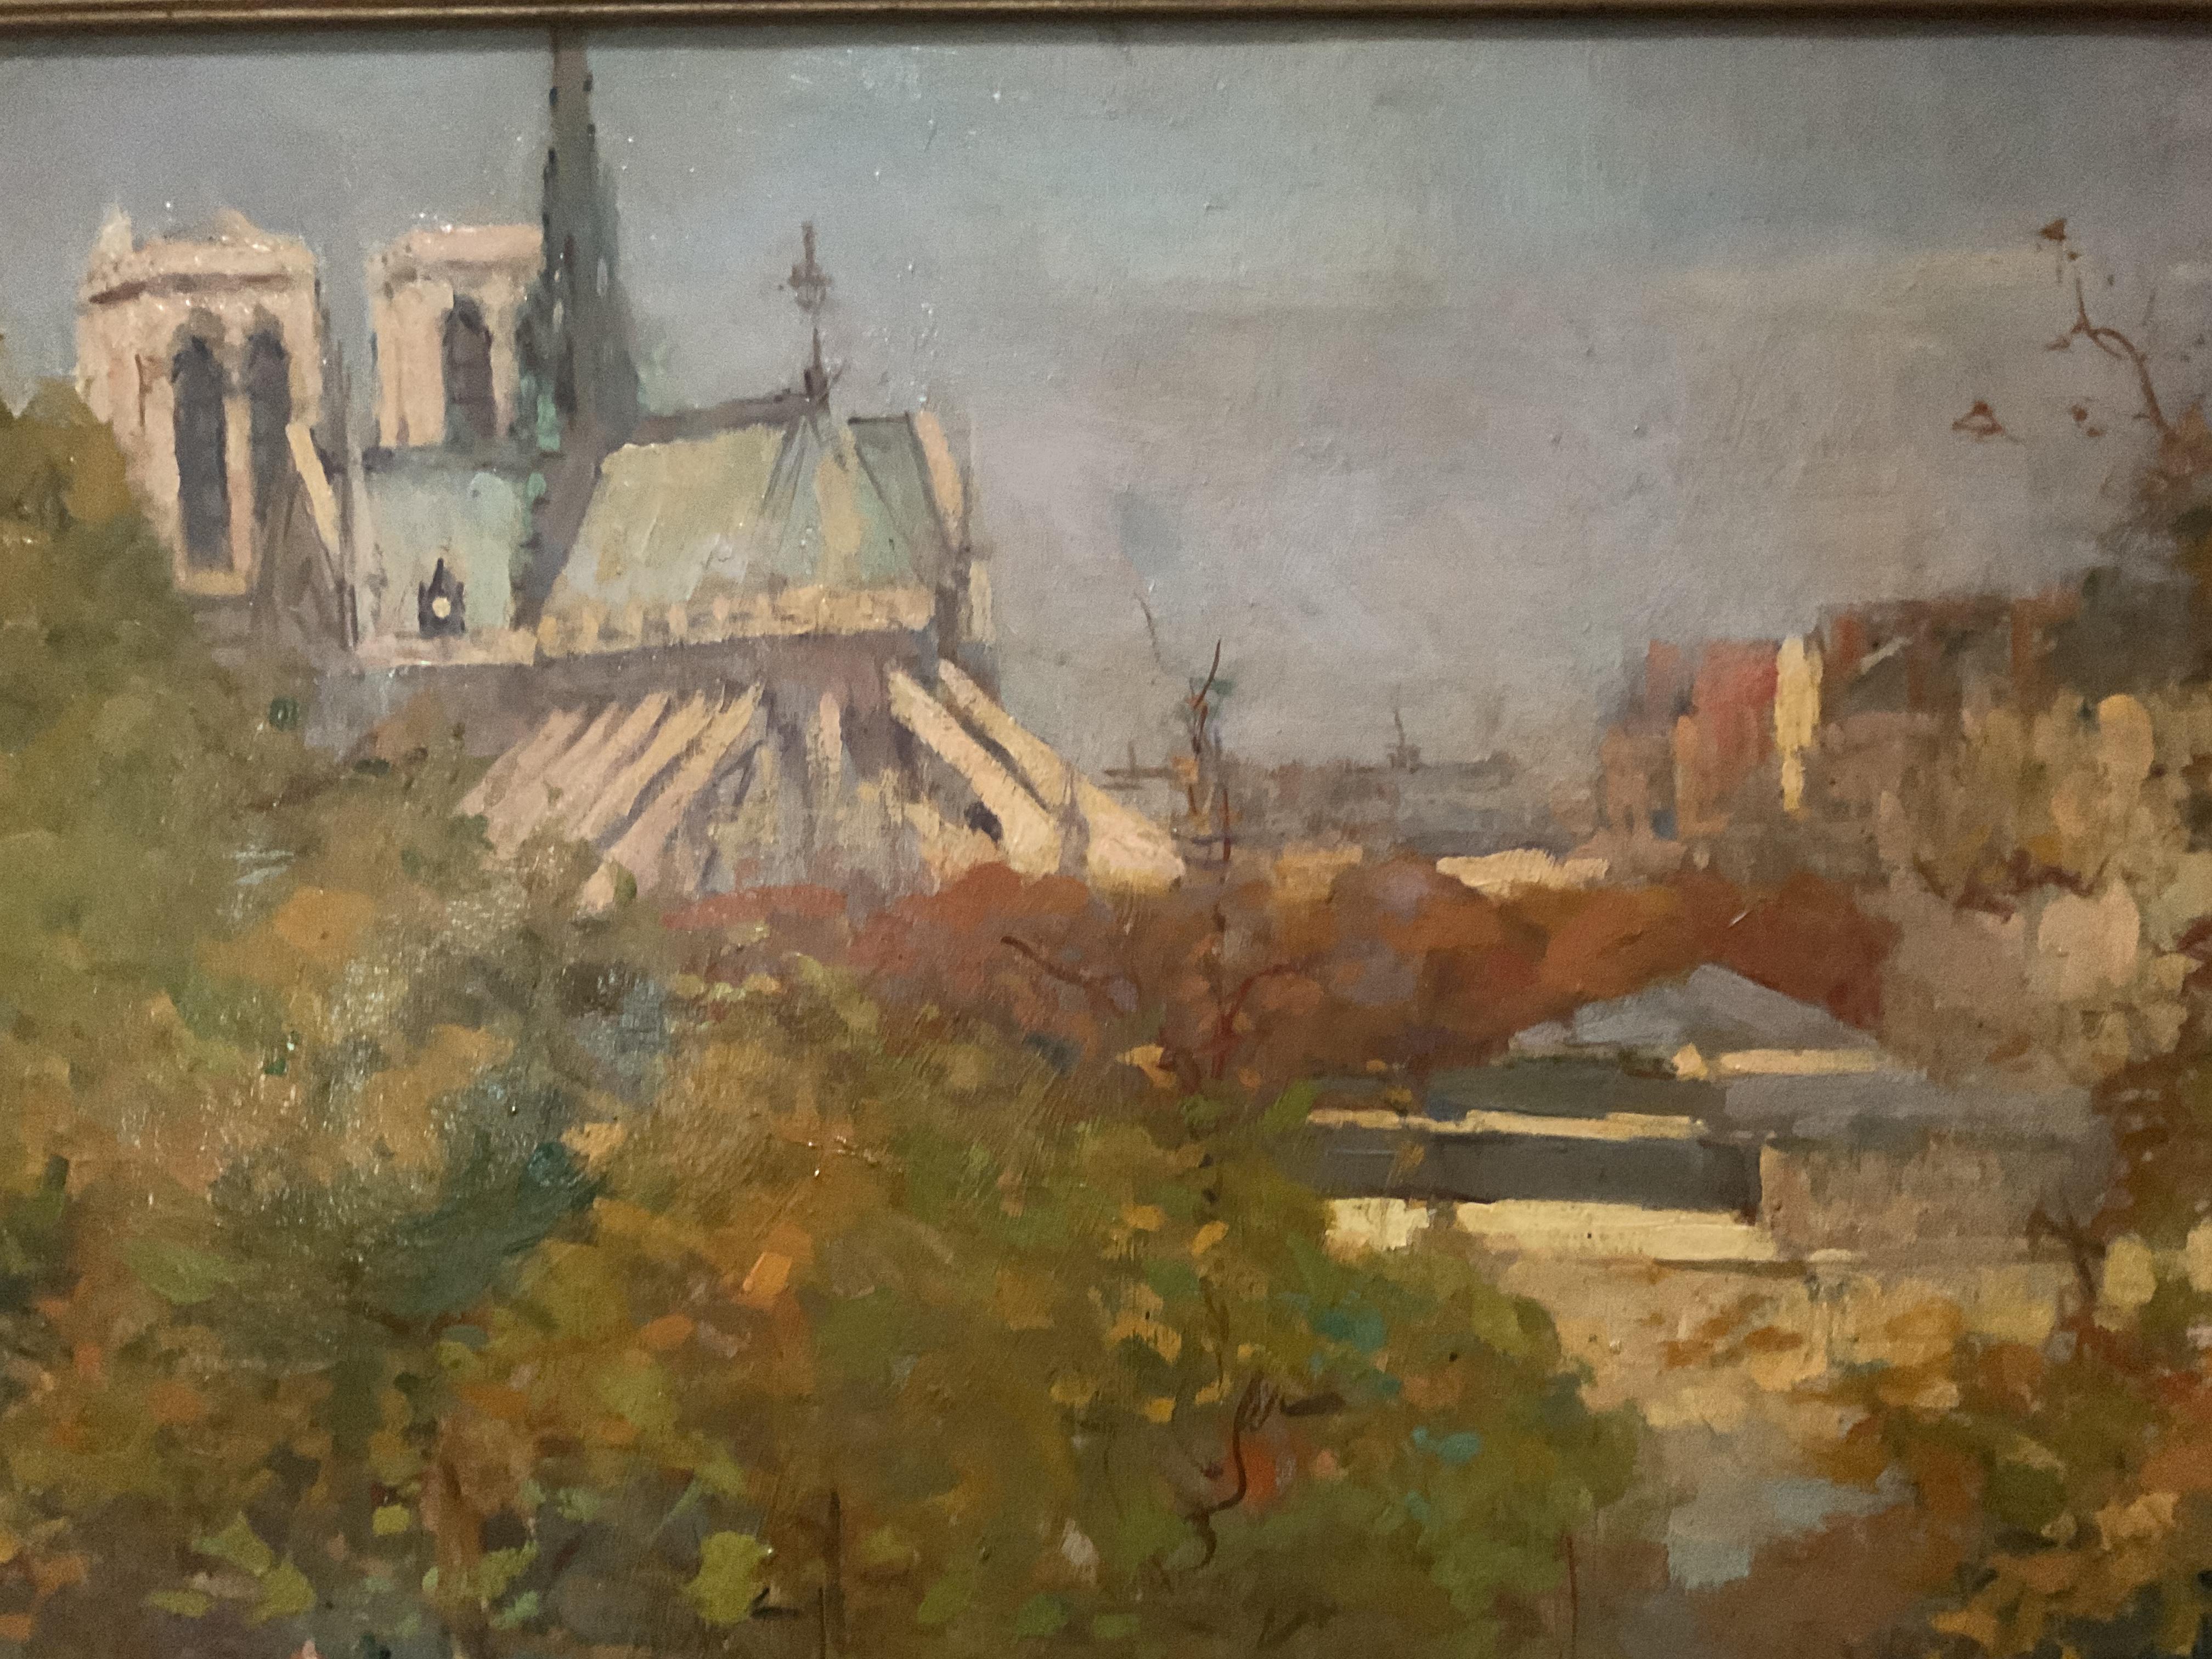 This is an early and one of the finest Parisian paintings that Maurice Ferdinand Perrot produced during his long career. The scene depicts early morning light washing the area along the Seine, the view across to Notre Dame and the edge of the Ile